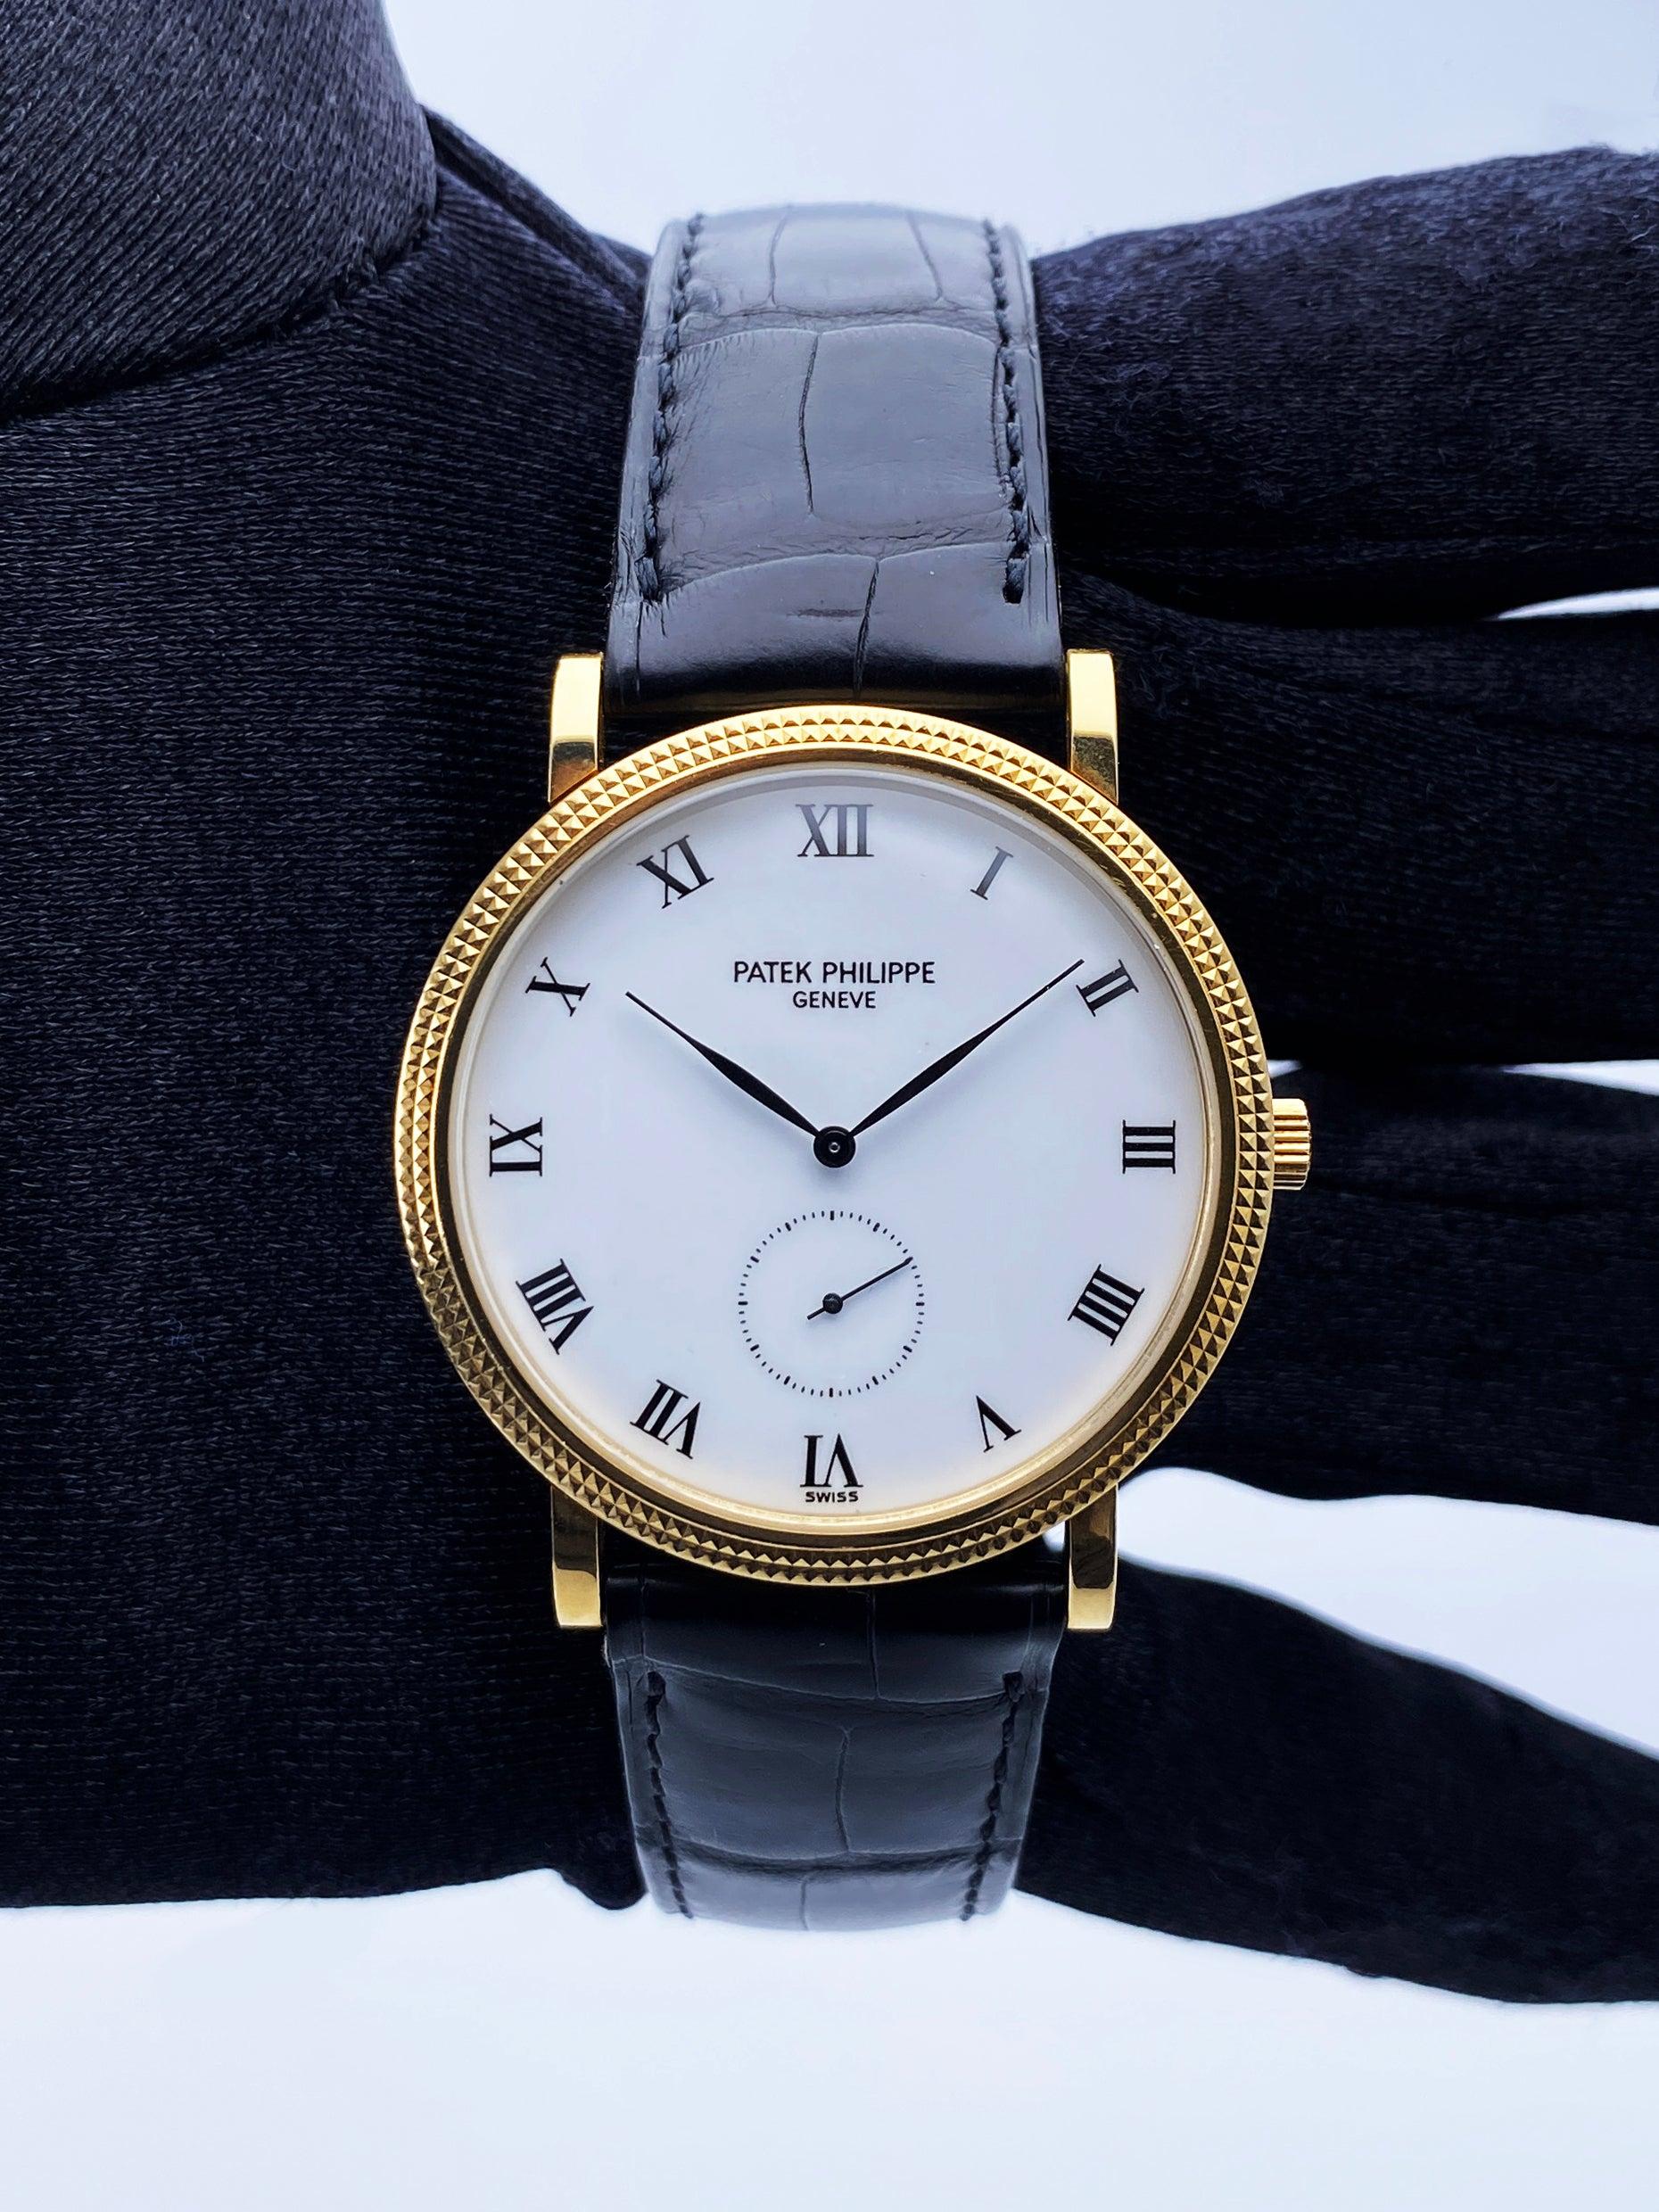 Patek Philippe Calatrava 3919J Mens Watch. 34mm 18K yellow gold case with 18K yellow gold hobnail patterned bezel. White dial with black hands and Roman numeral hour marker. Small second sub-dial display between 5 & 7 o'clock position.